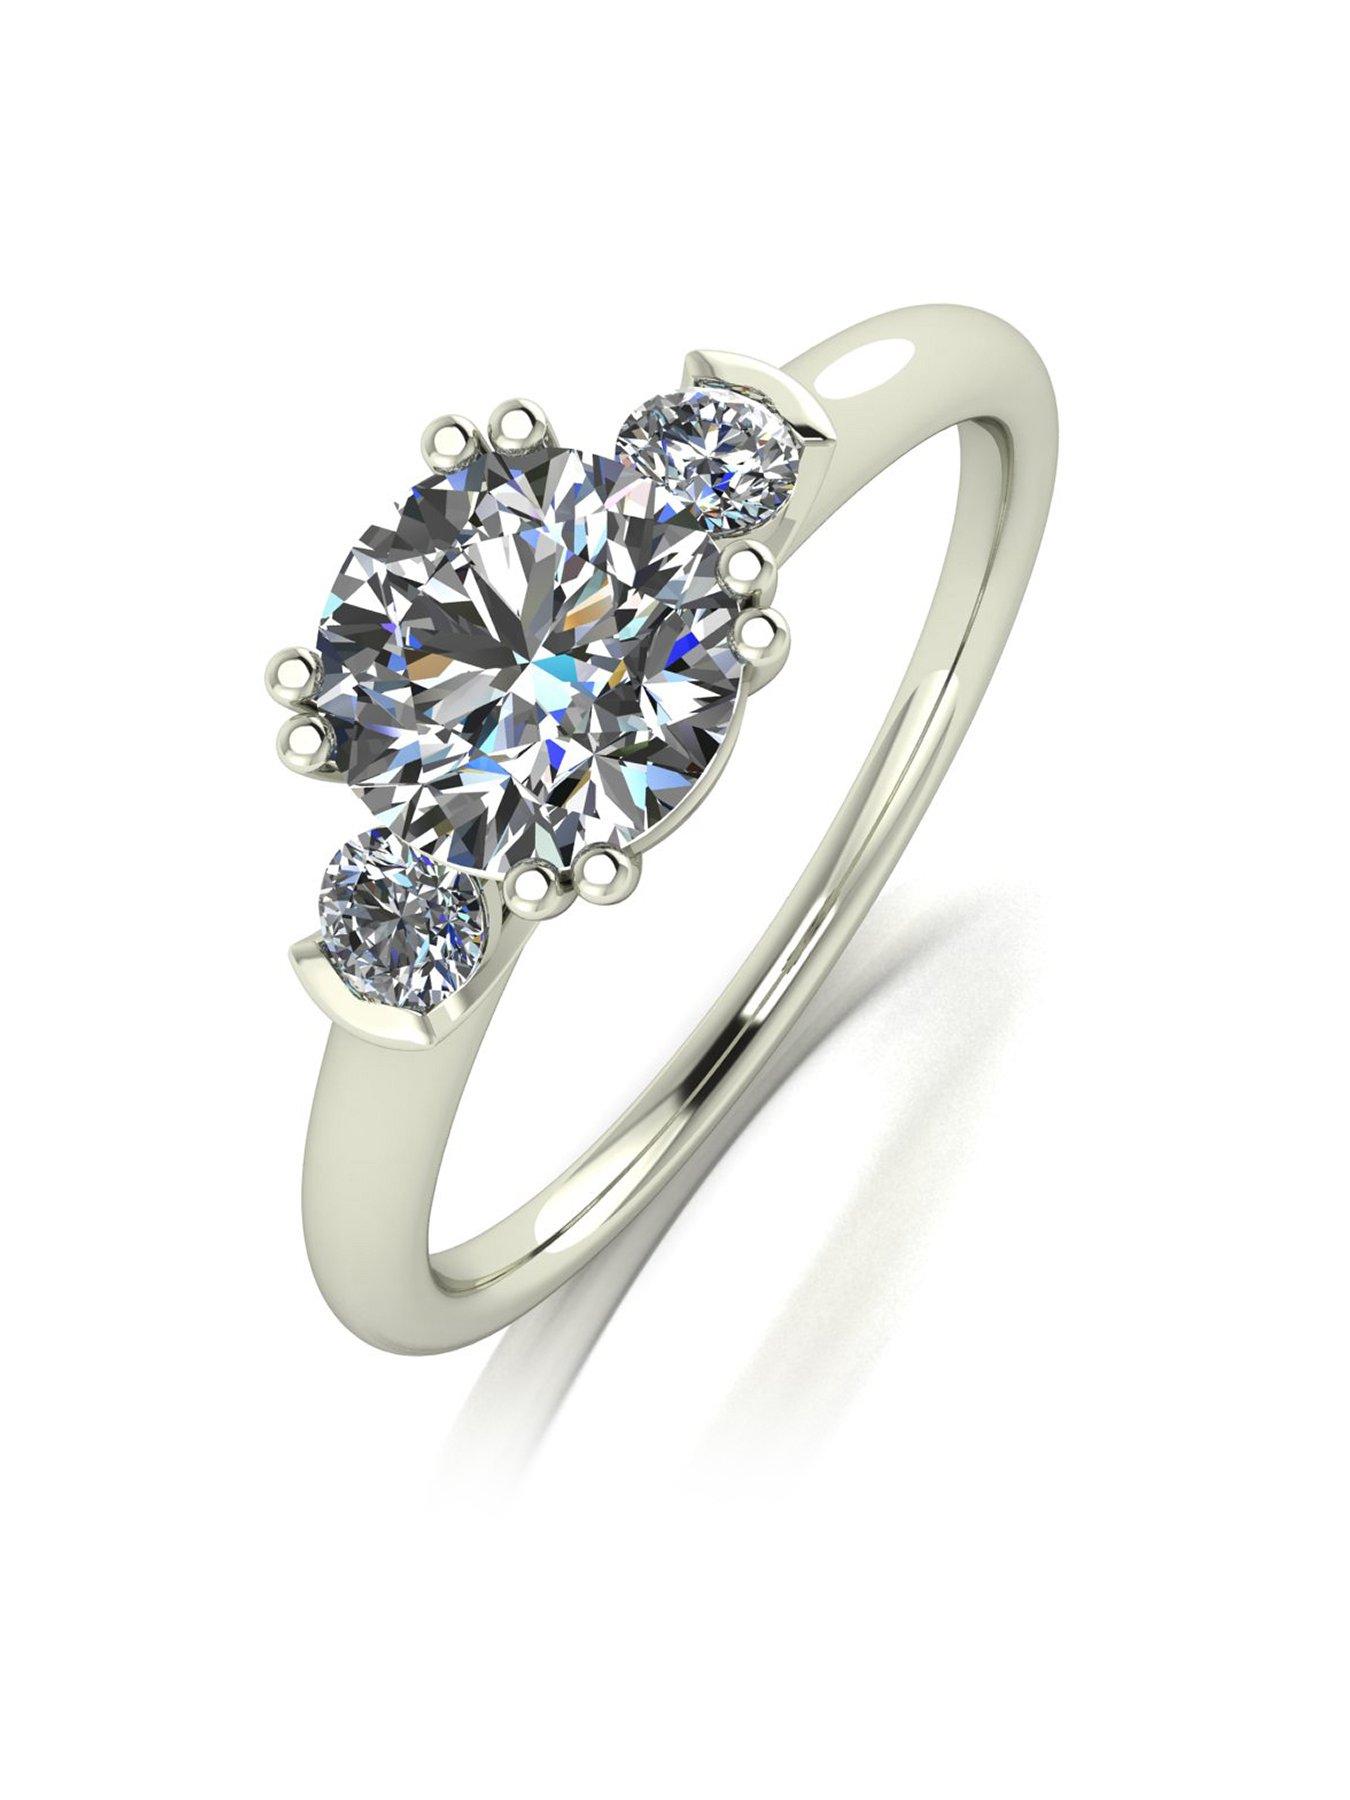 Details about   2.30ct Oval Blue Diamond Split Shank Halo Engagement Wedding Ring in 925 Silver 